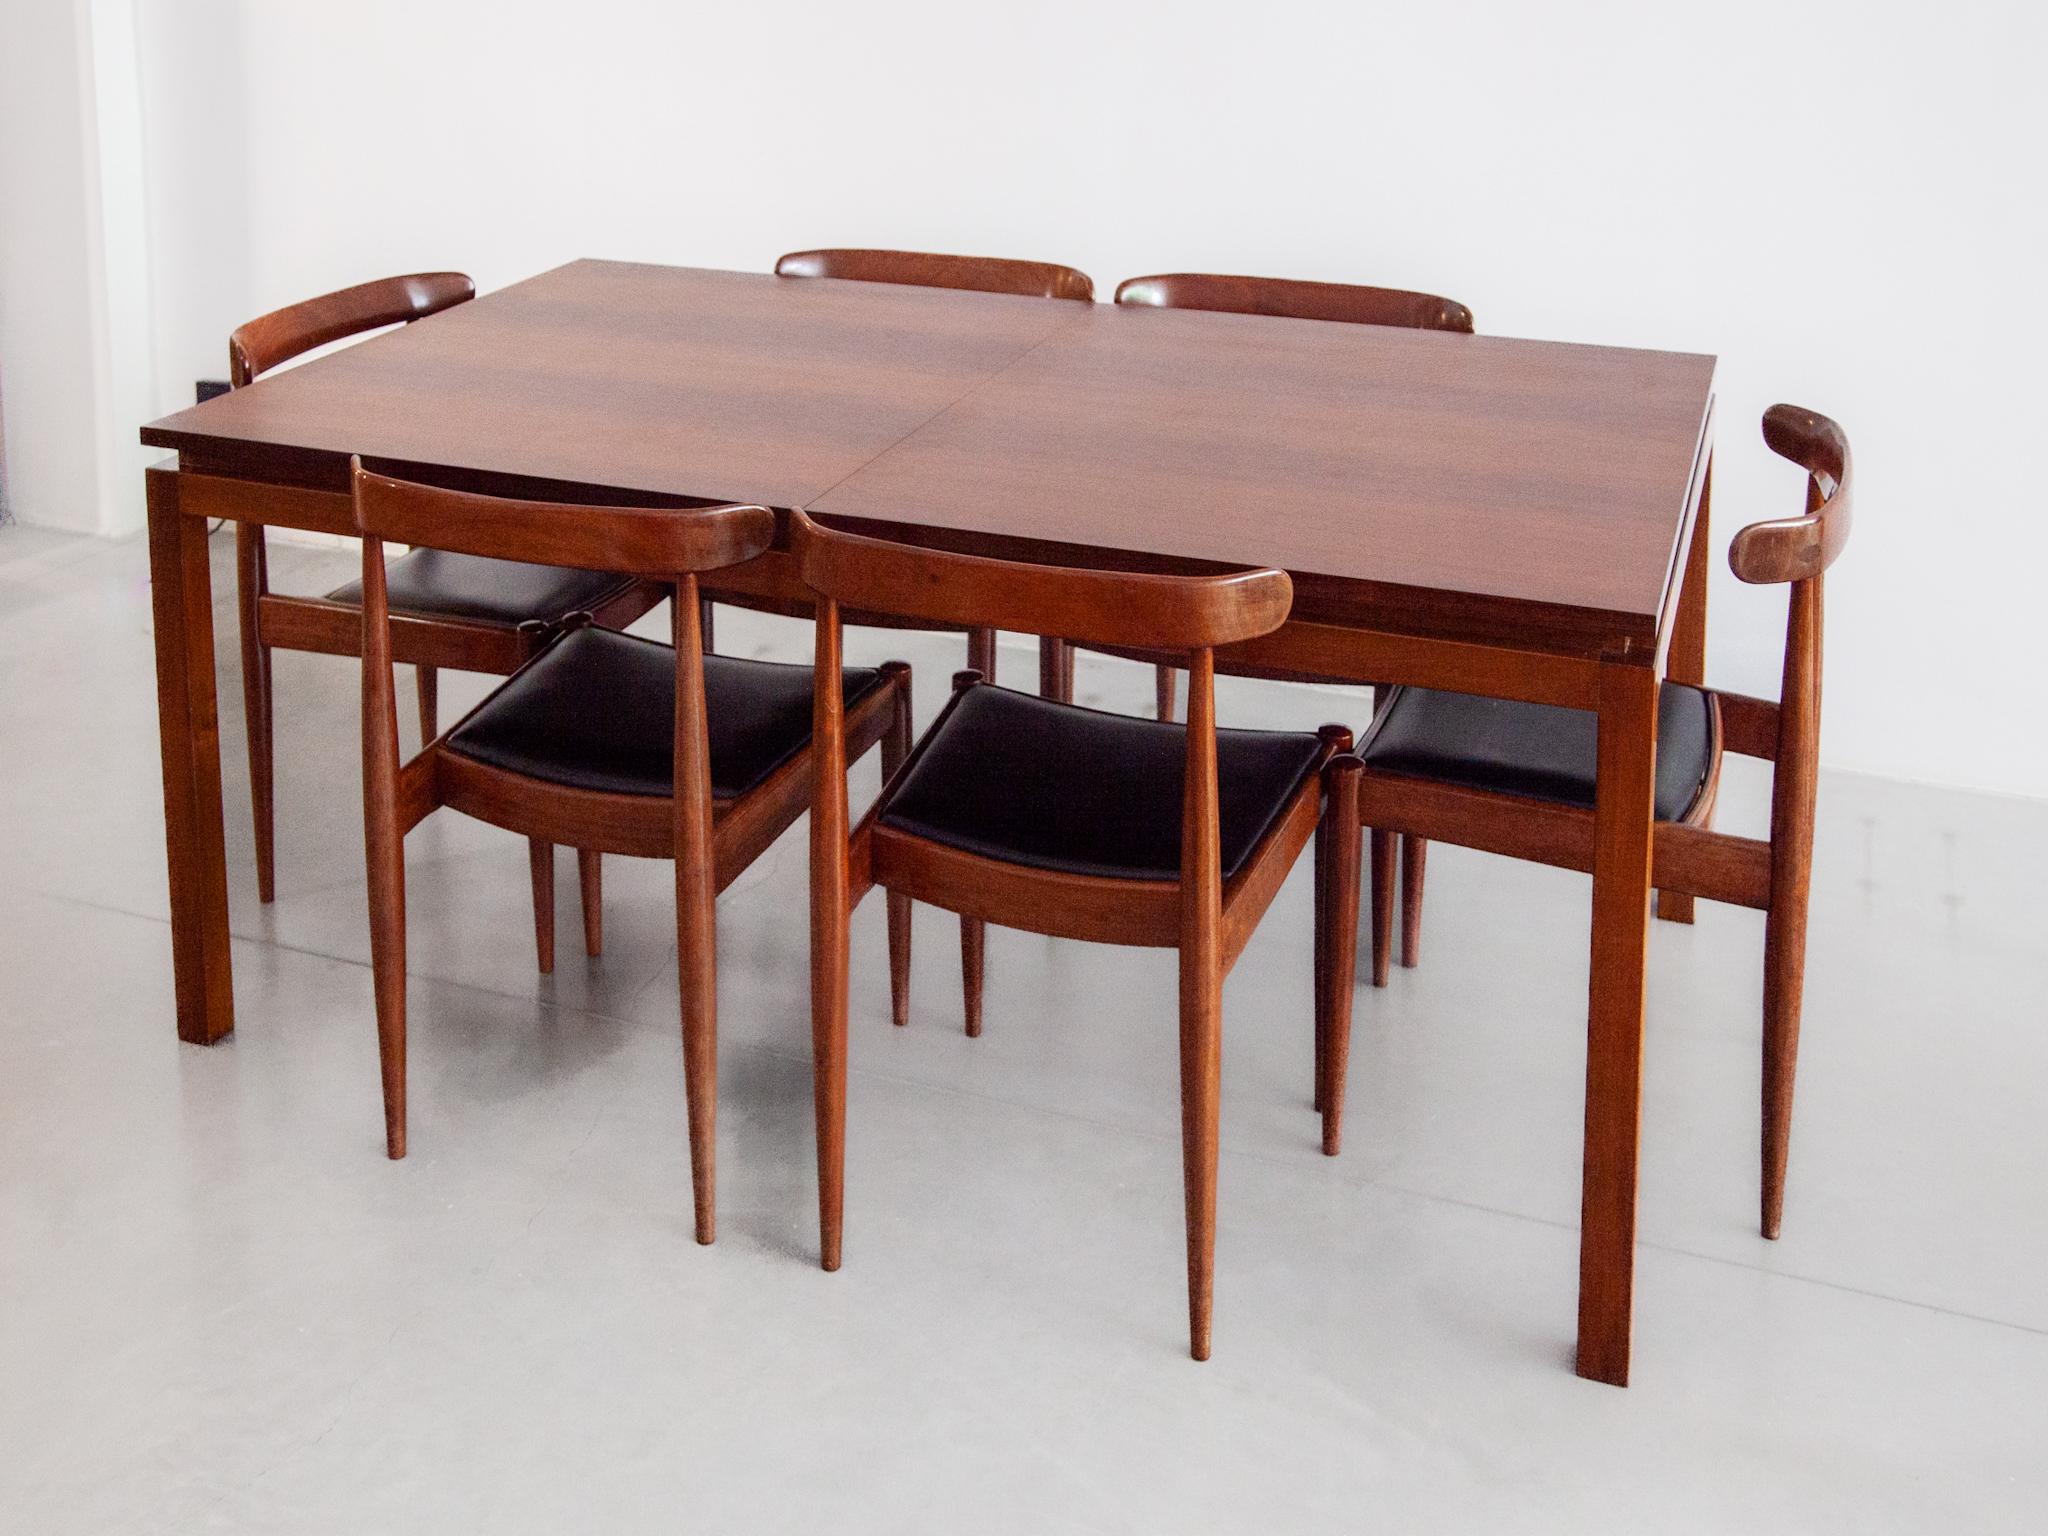 Mid-Century Modern Diningroom Set Table and Six Chairs by Alfred Hendrickx 1960s for Belform